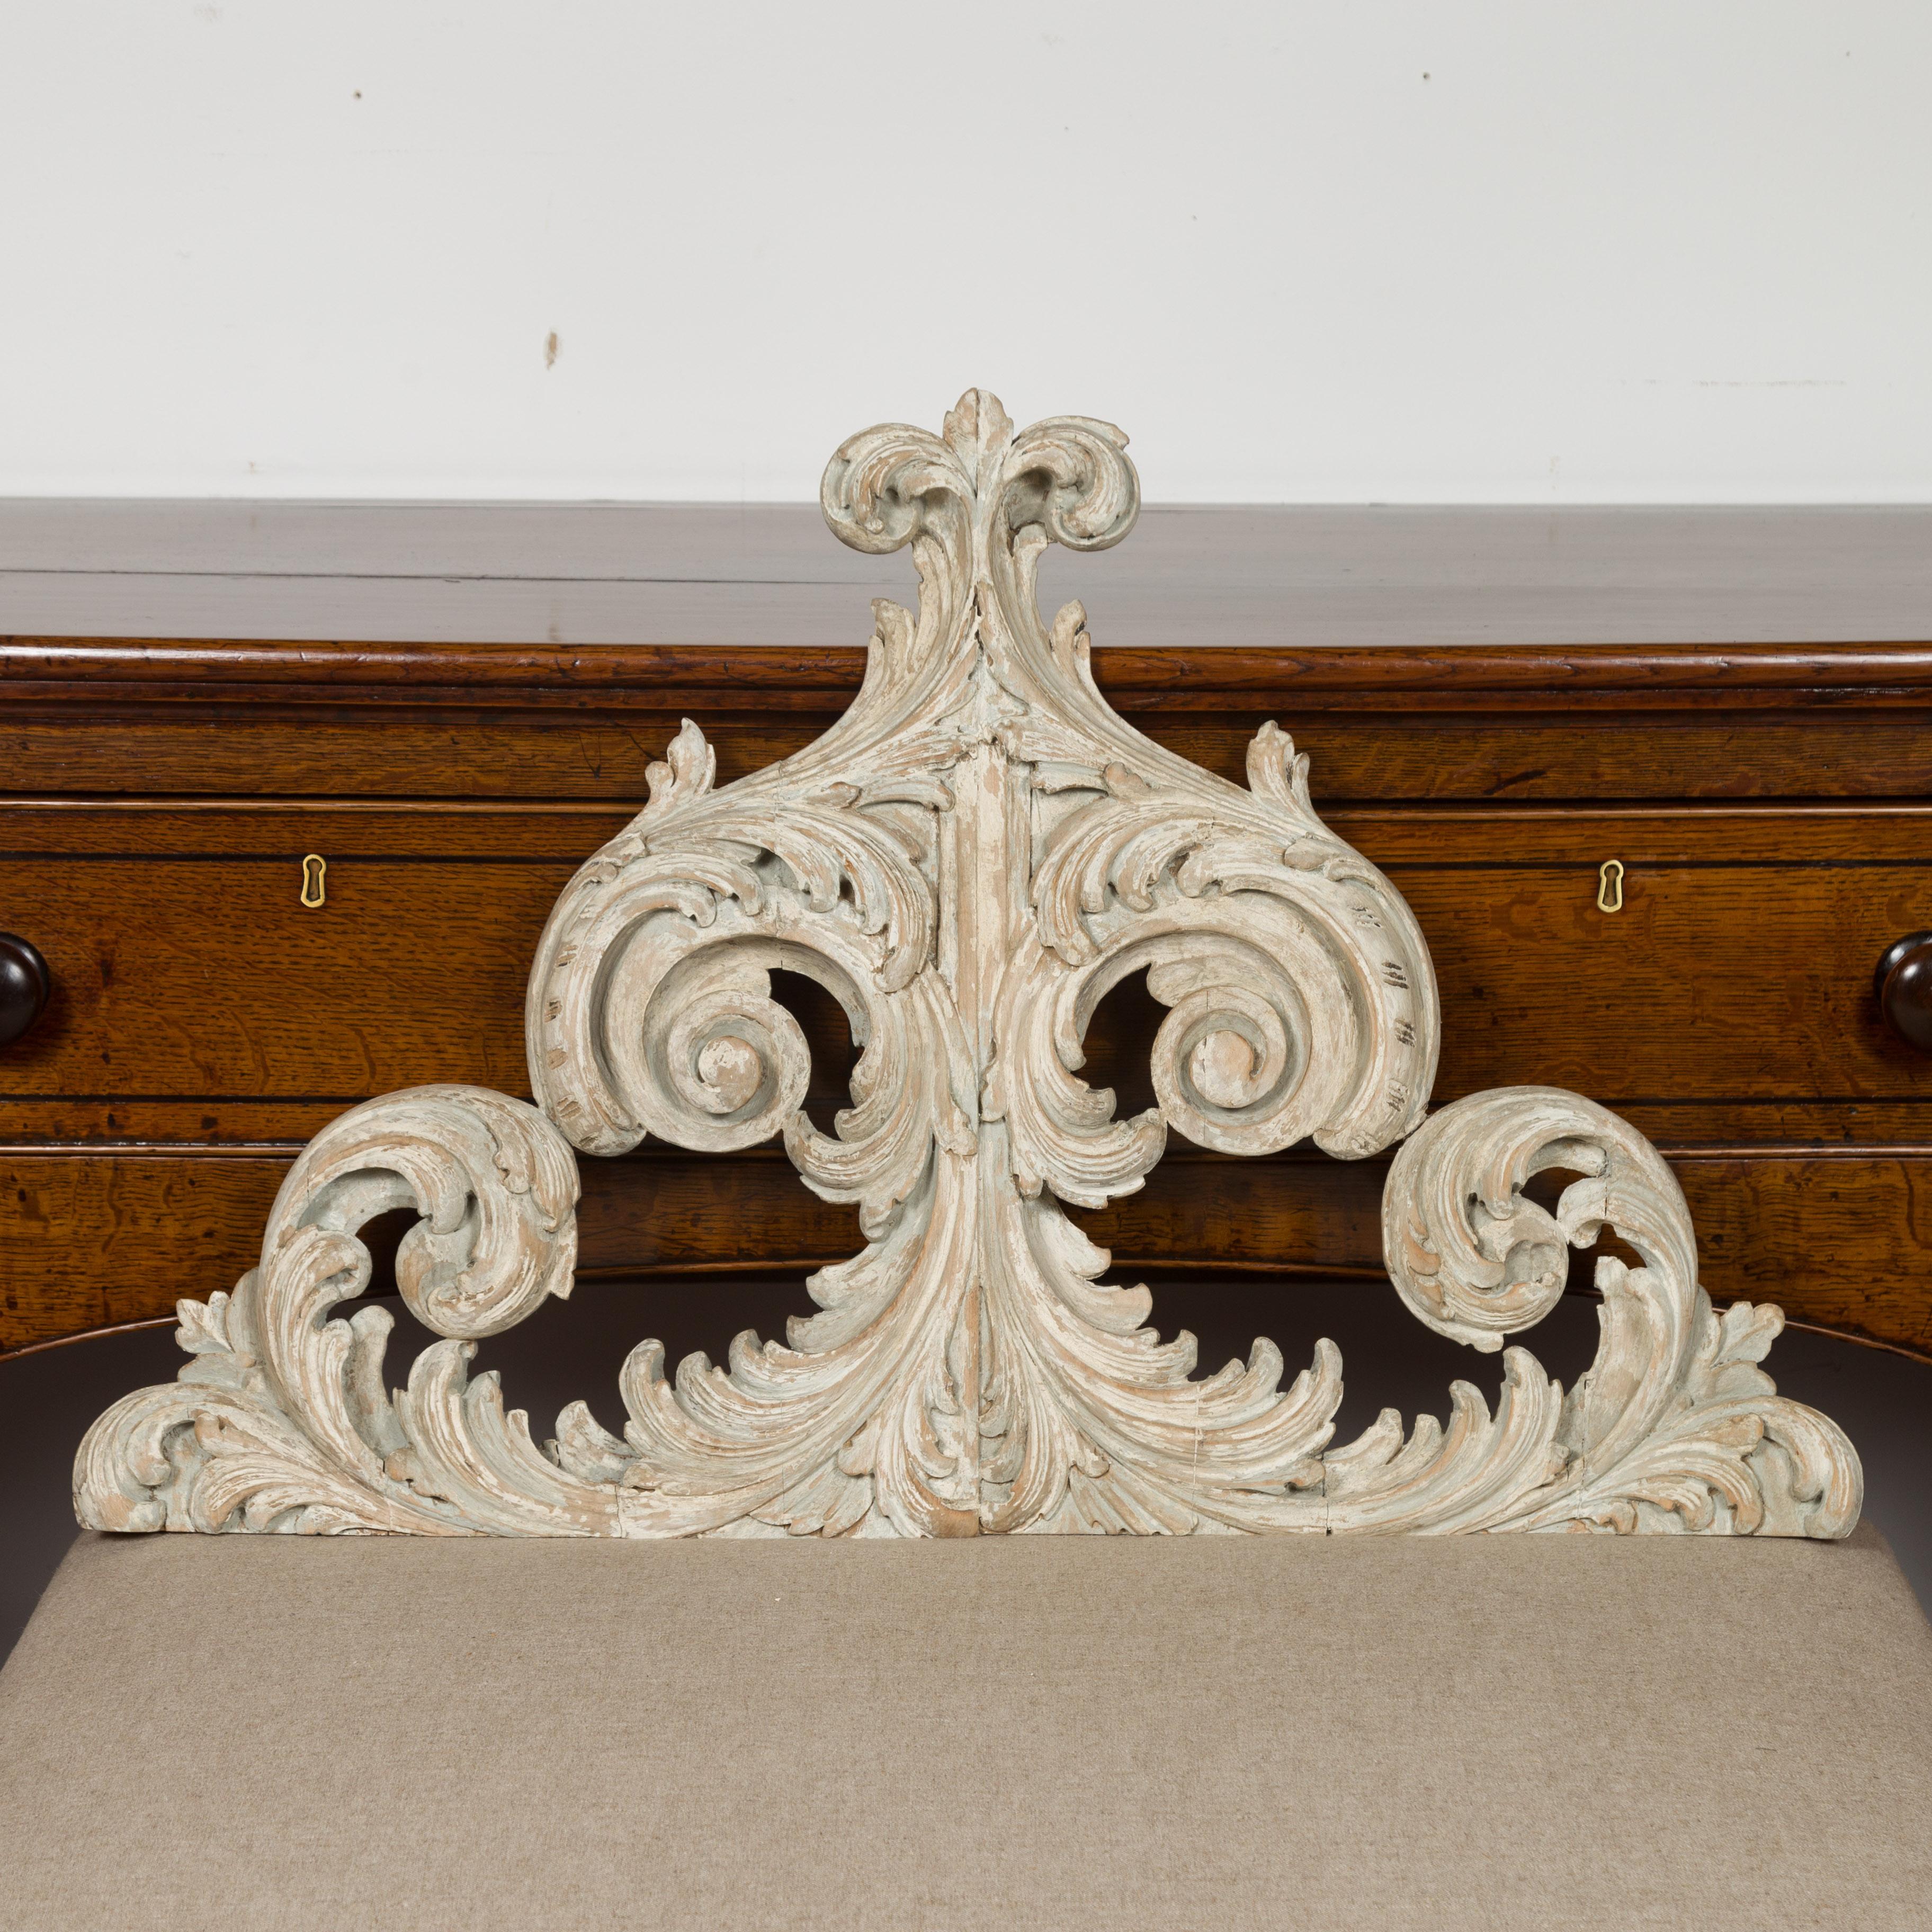 An Italian Rococo style painted wood architectural fragment from the late 19th century, with carved acanthus leaves, volutes and distressed finish. Created in Italy during the later years of the 19th century, this architectural fragment attracts our